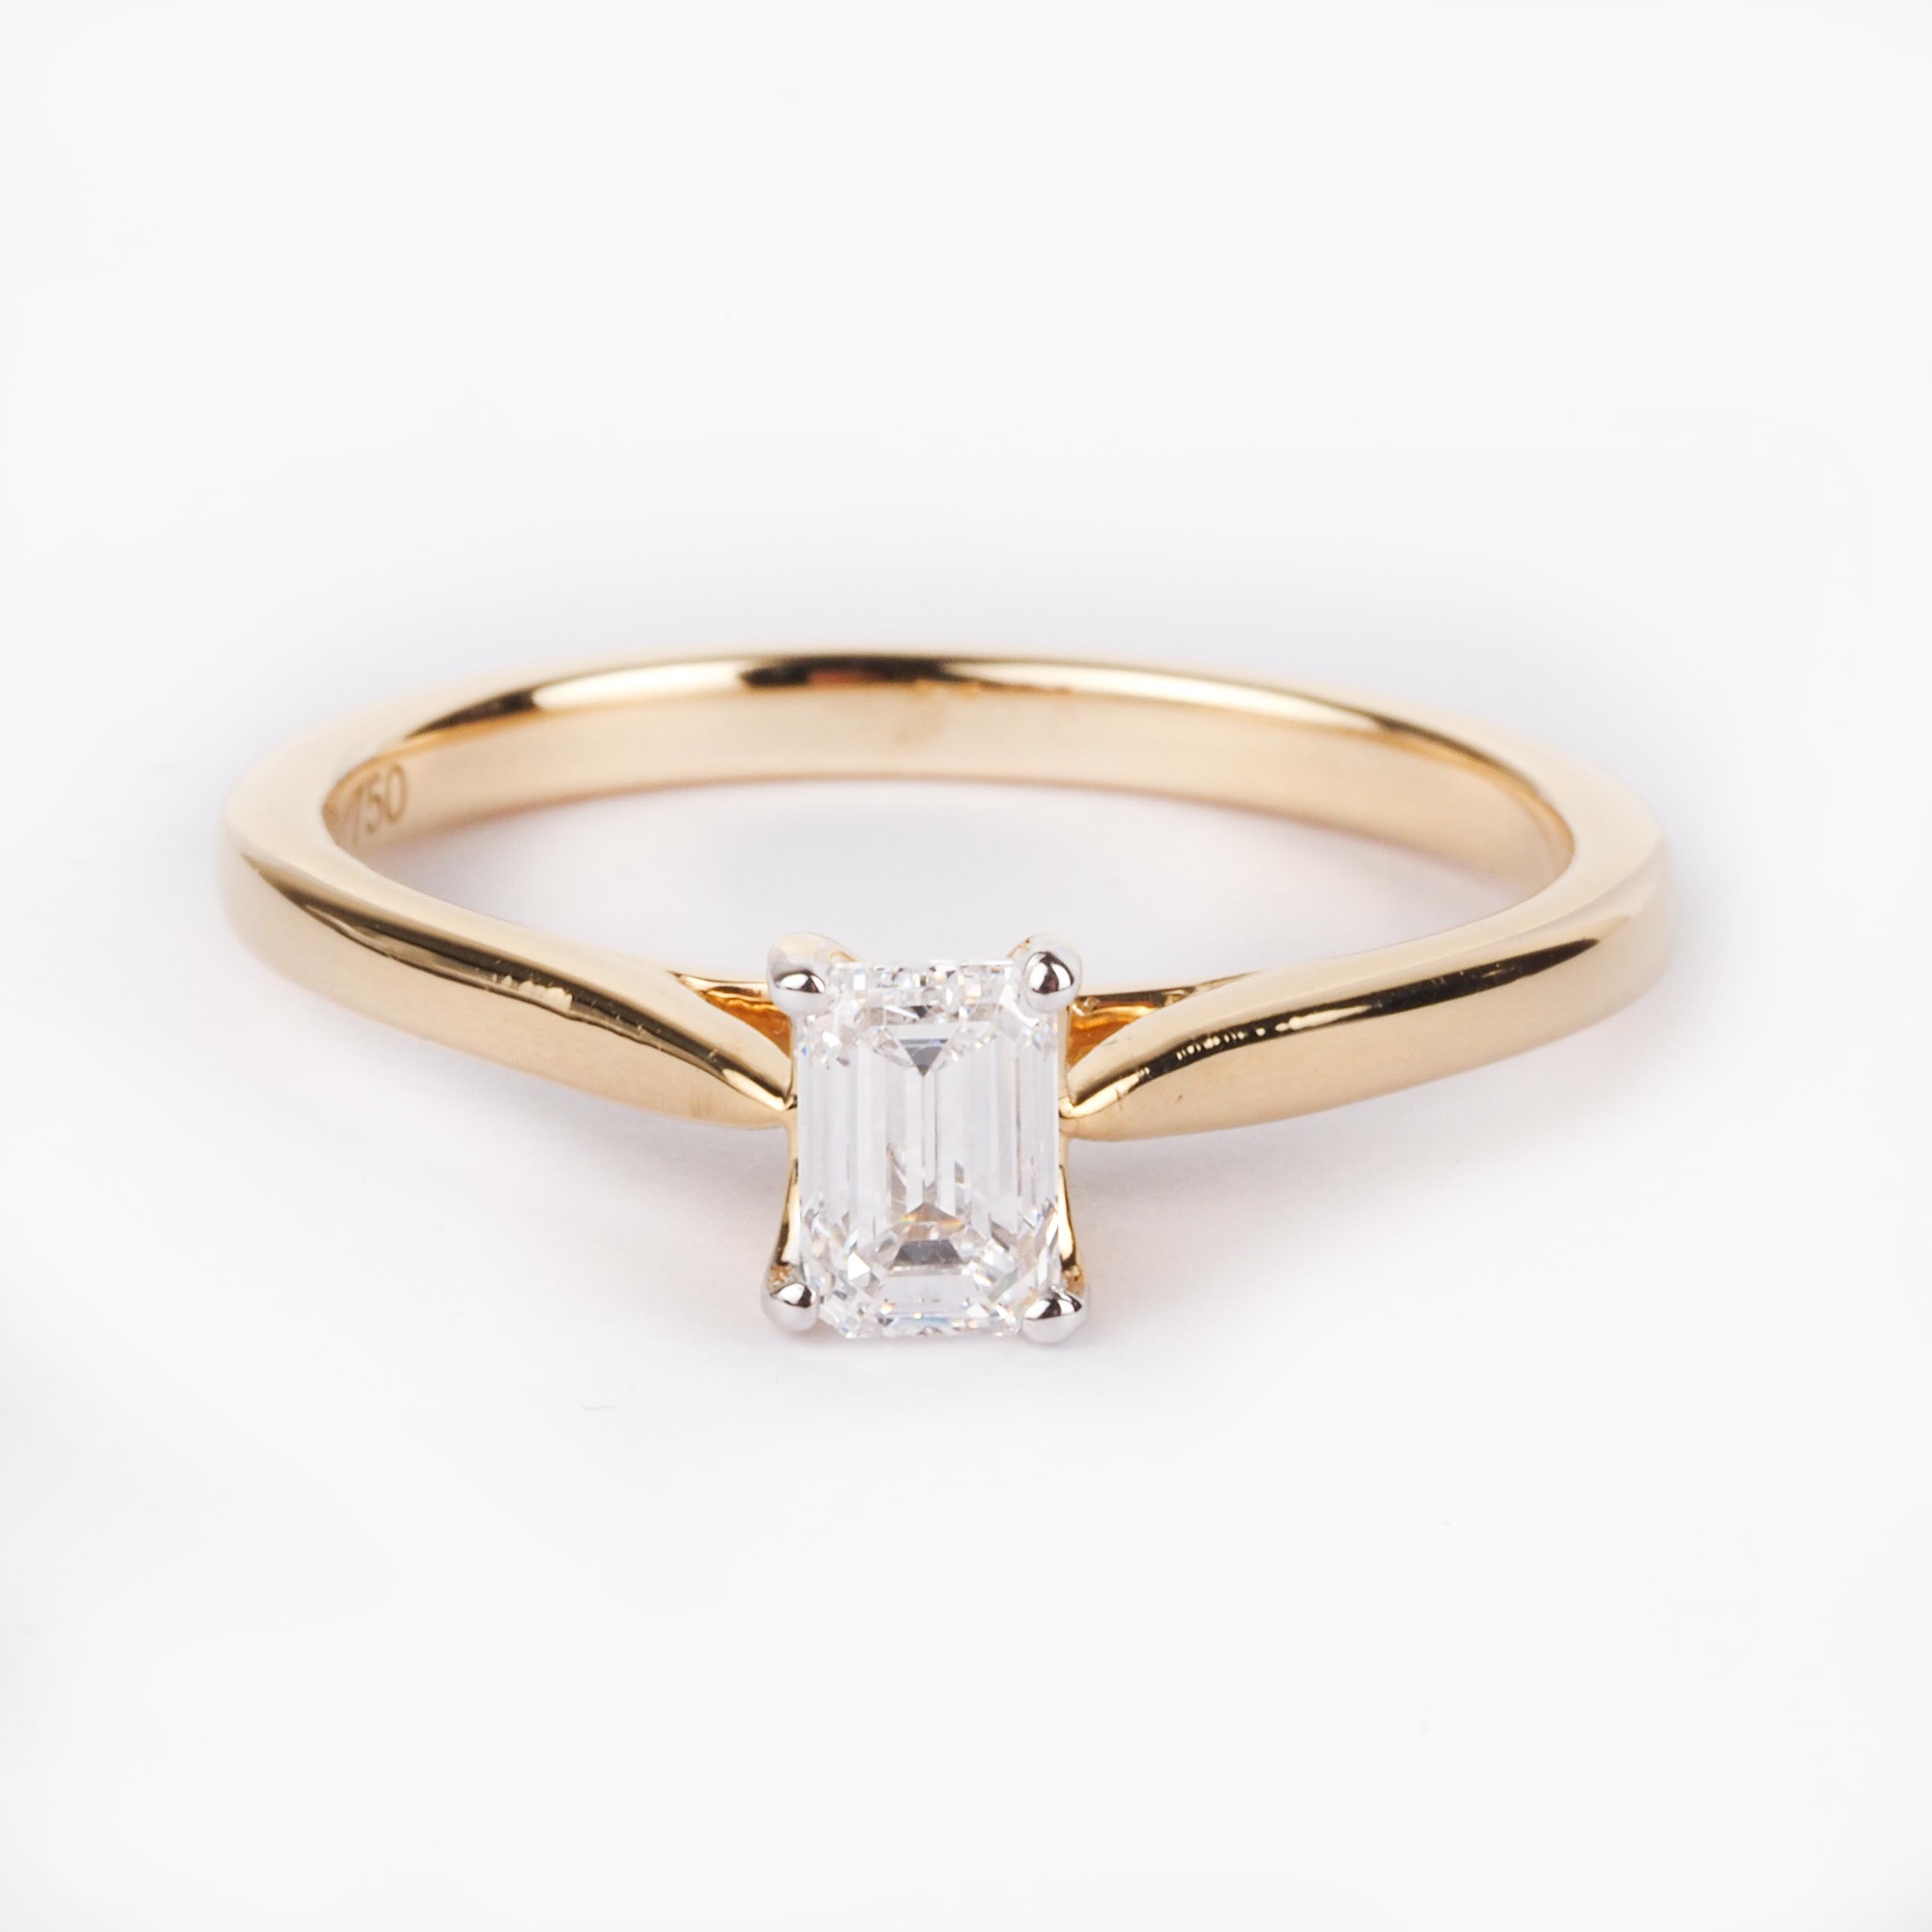 18ct Yellow Gold Solitaire Diamond Ring LR-7338